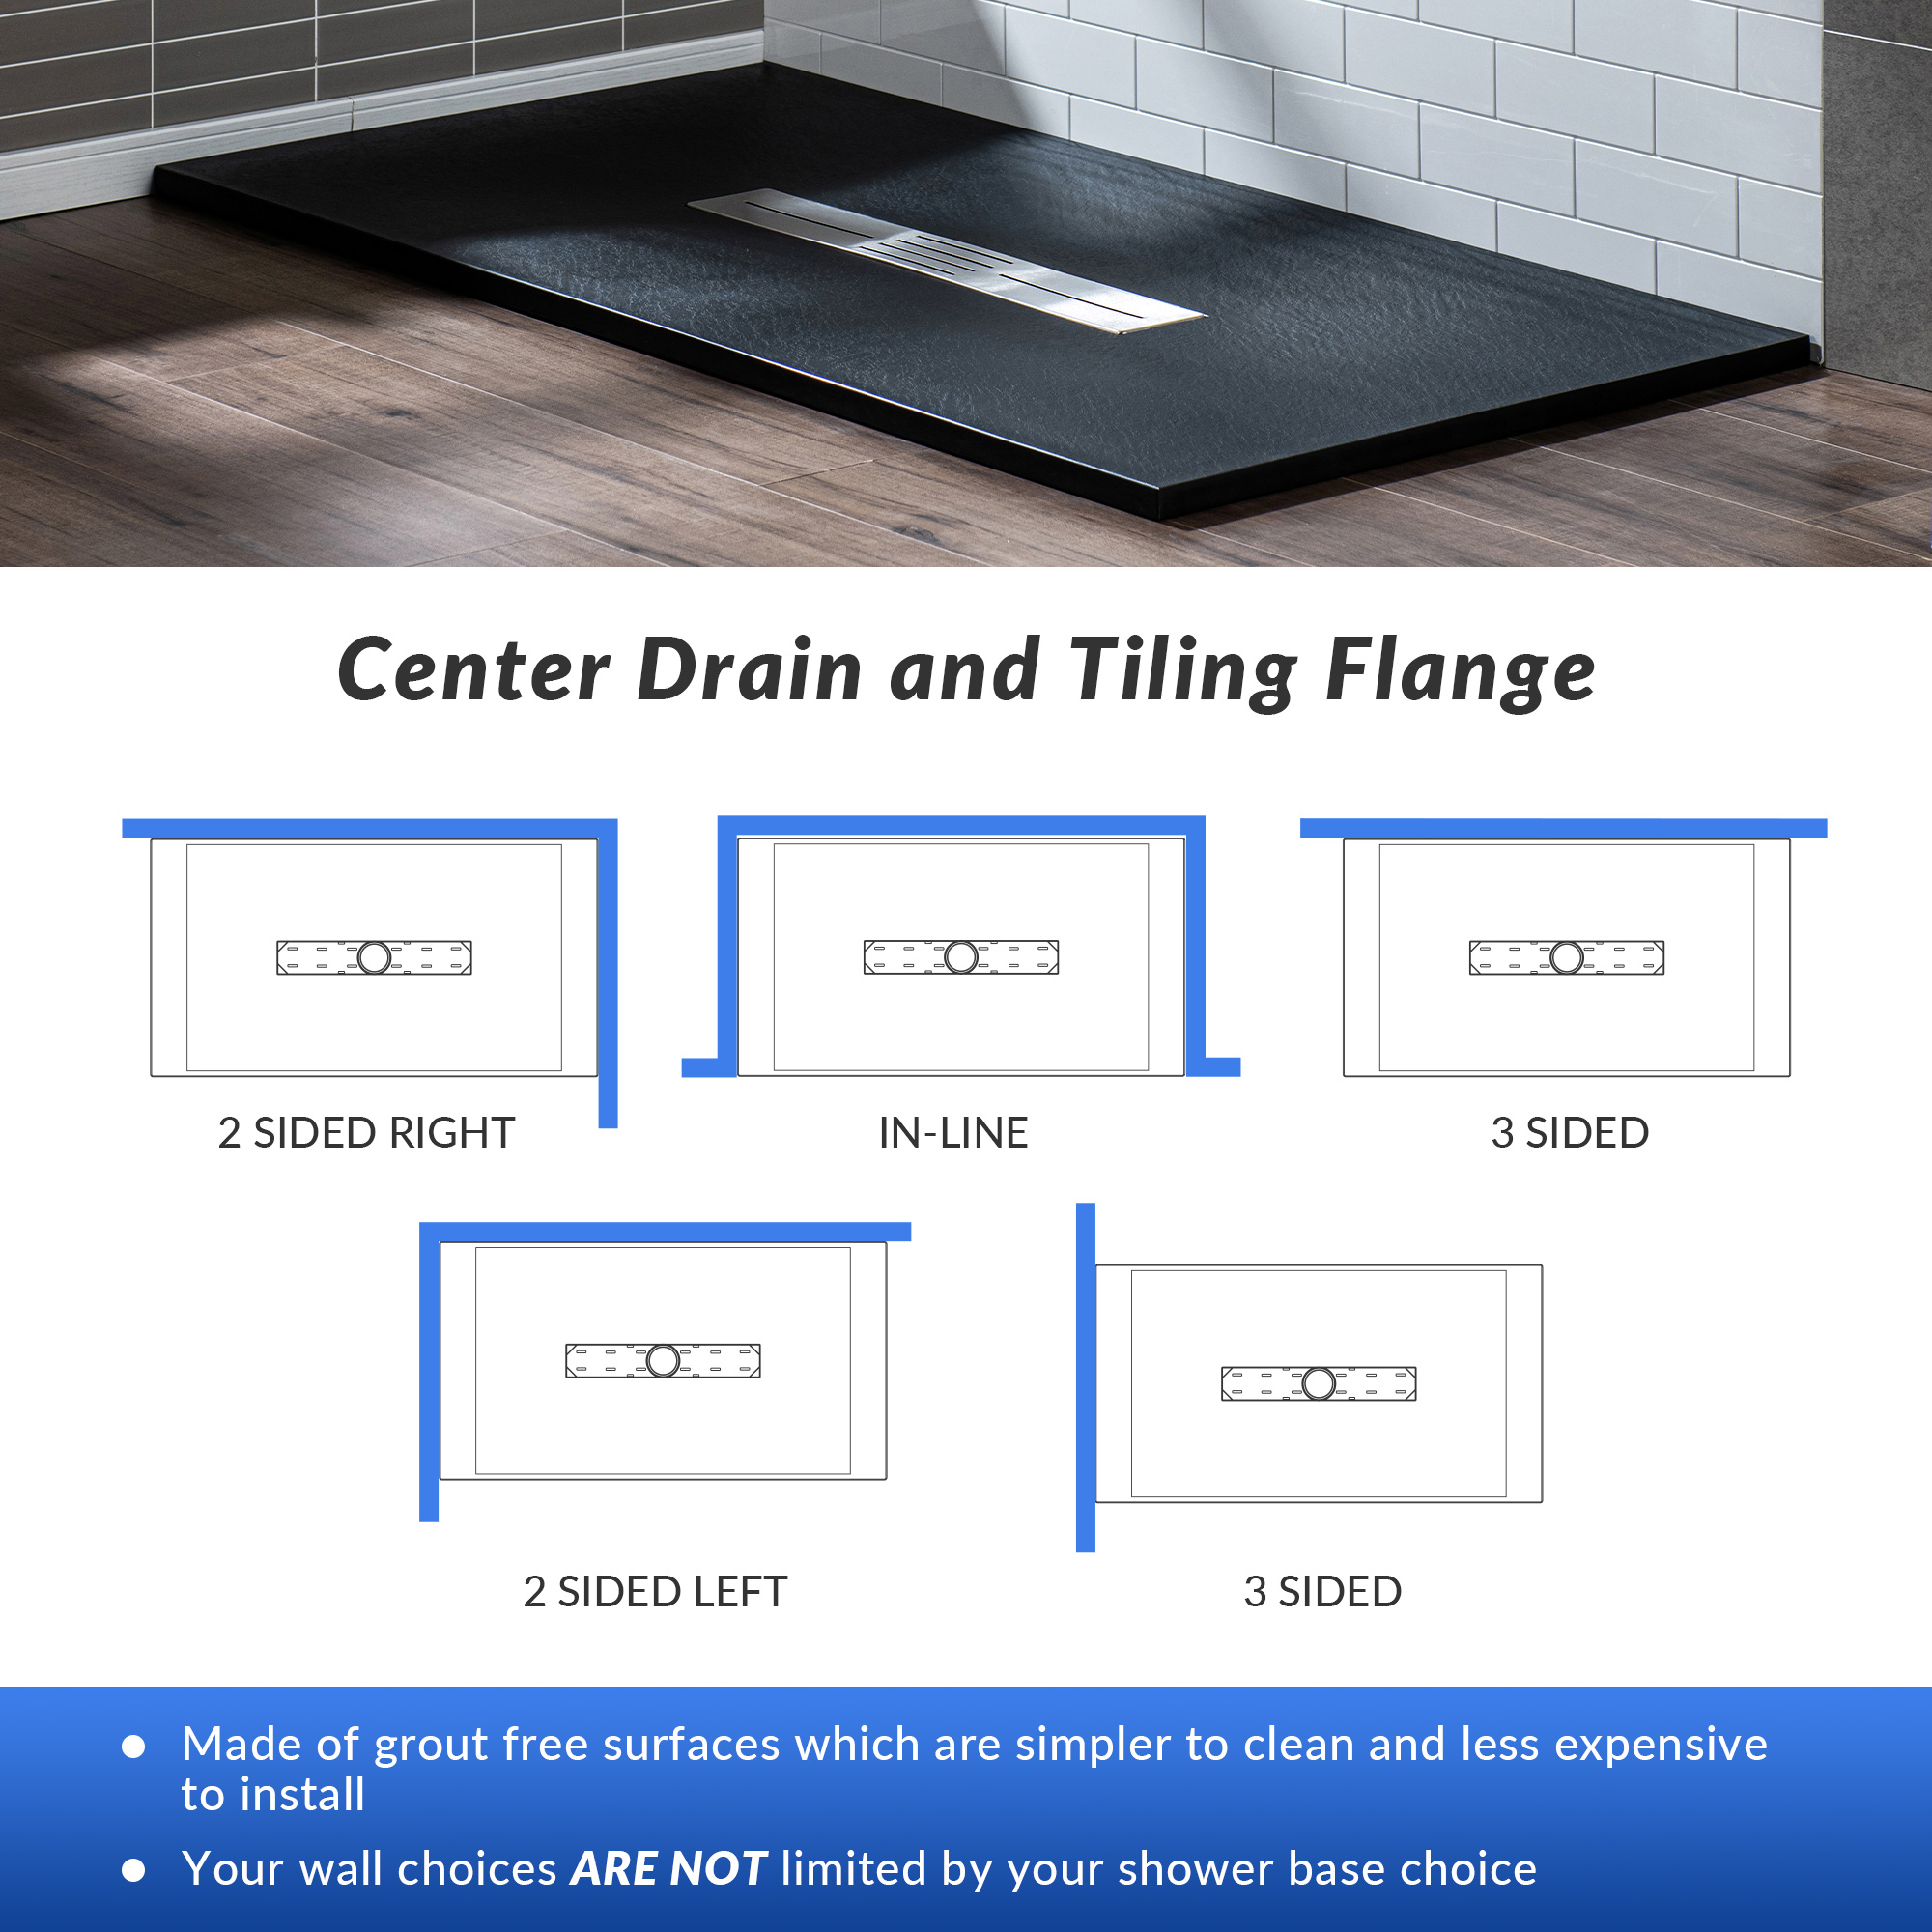  WOODBRIDGE 48-in L x 32-in W Zero Threshold End Drain Shower Base with Center Drain Placement, Matching Decorative Drain Plate and Tile Flange, Wheel Chair Access, Low Profile, Black_15115